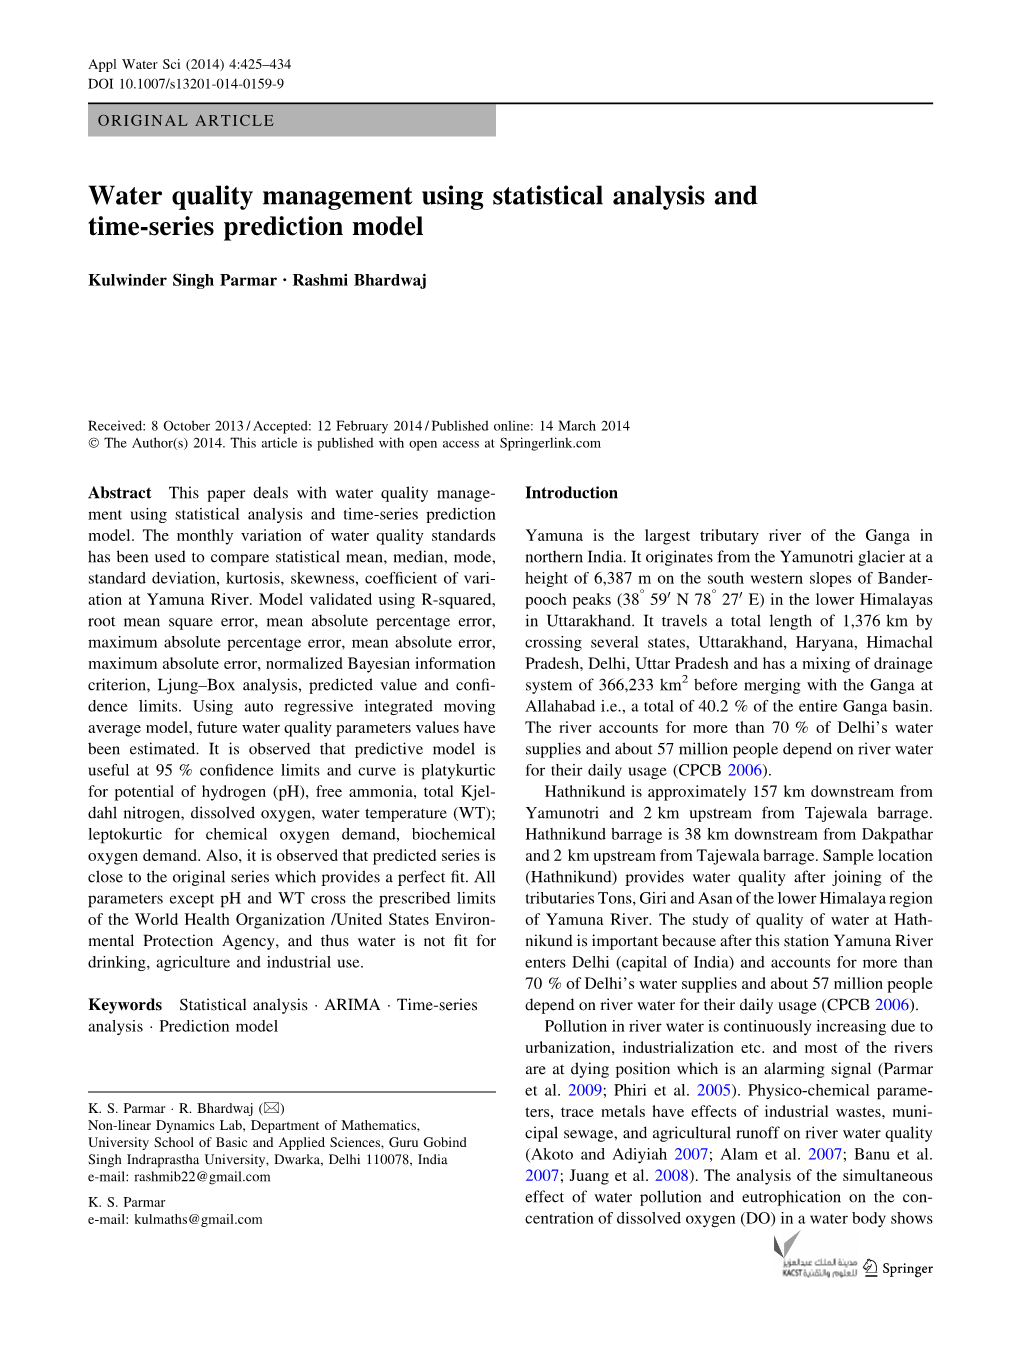 Water Quality Management Using Statistical Analysis and Time-Series Prediction Model